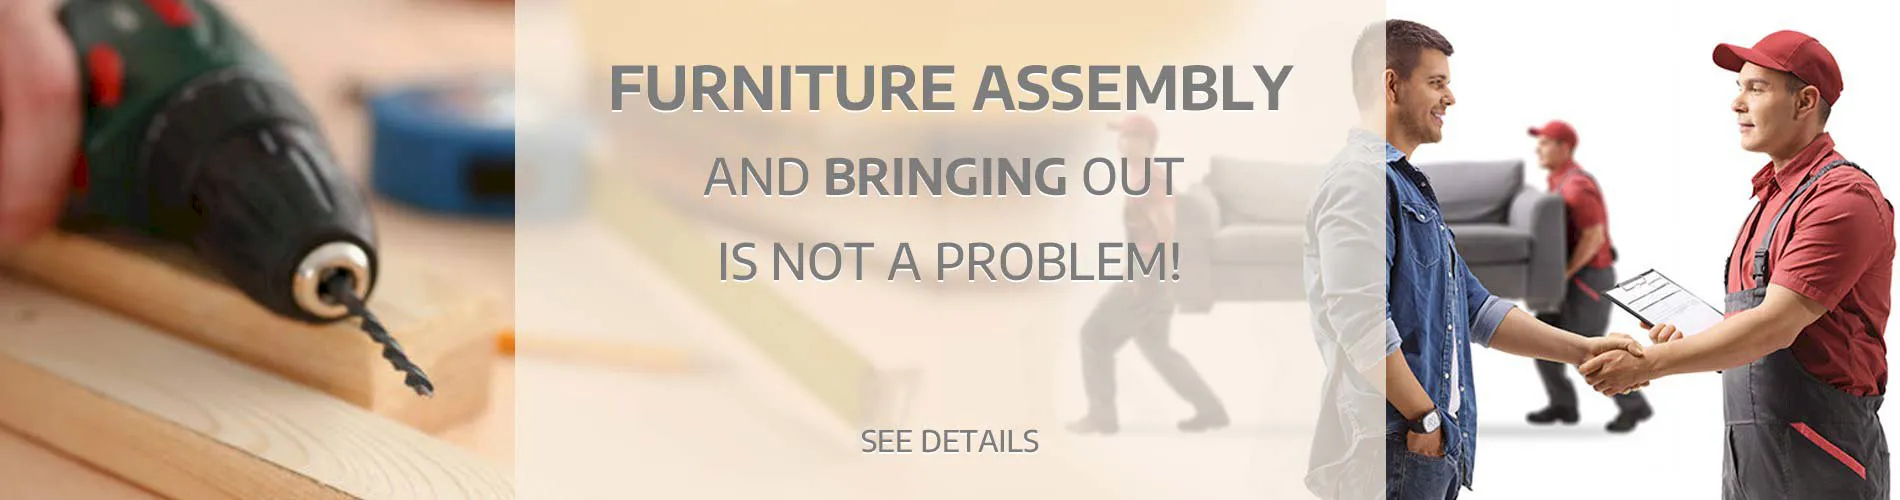 Furniture assembly and delivery